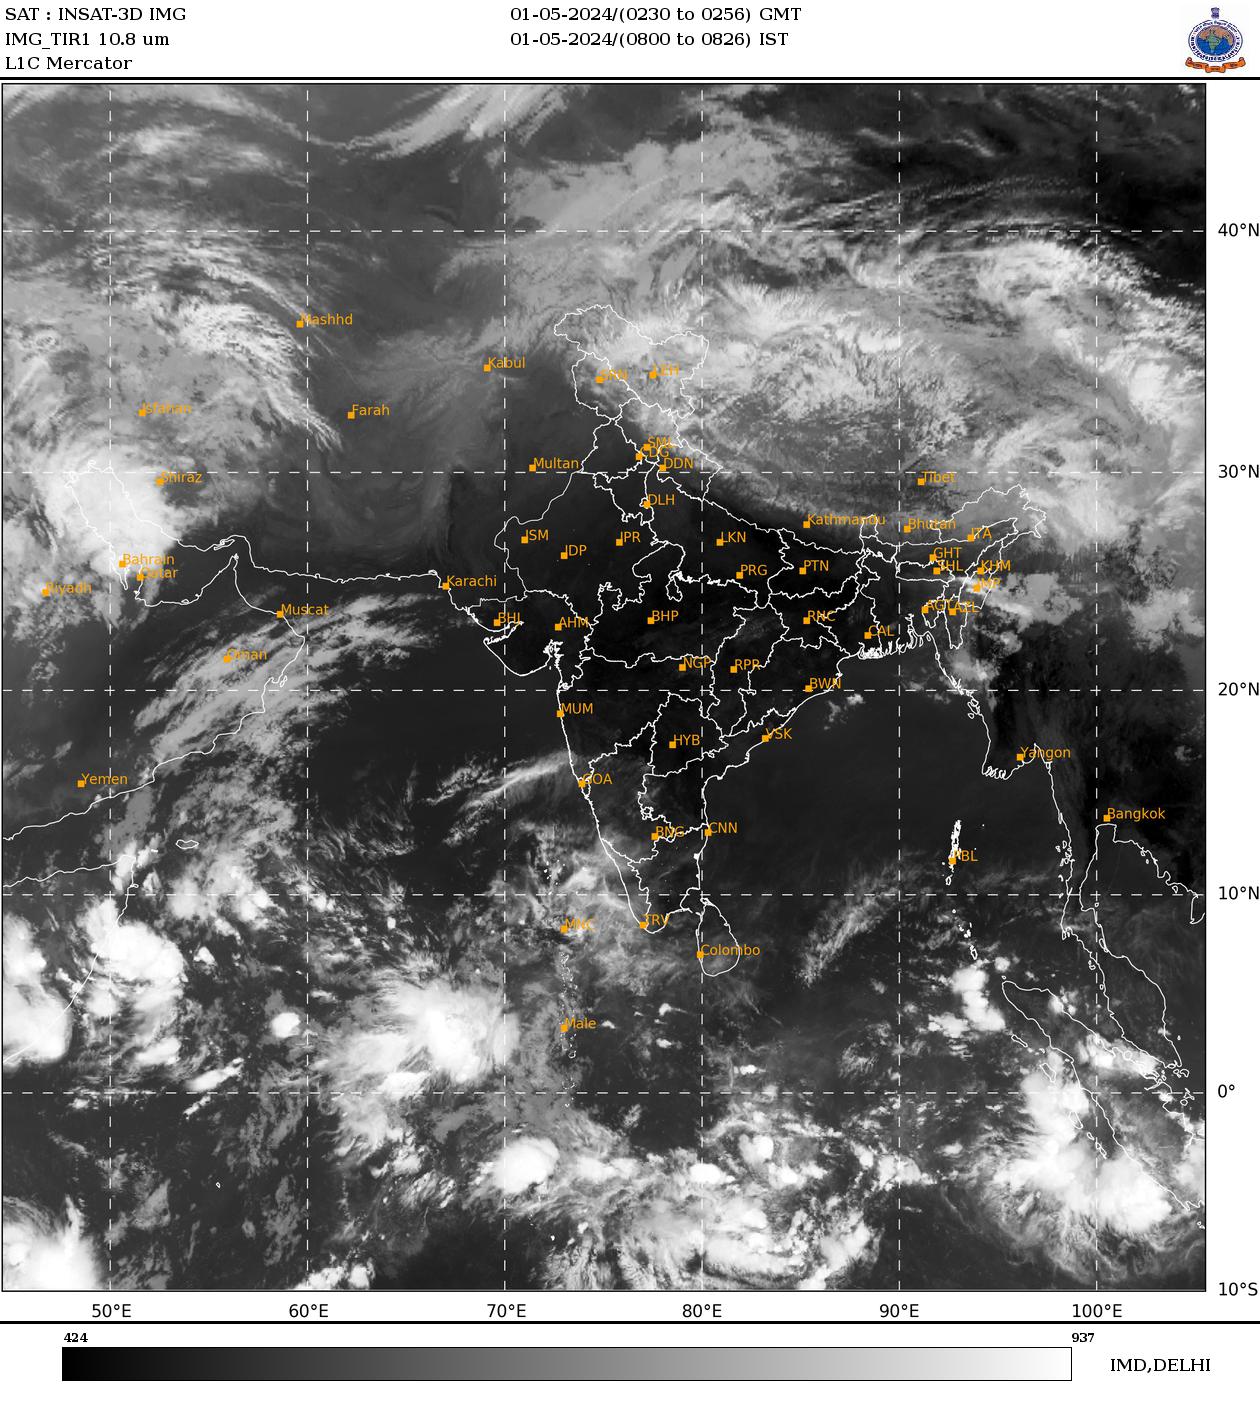 Infrared Imagery INSAT